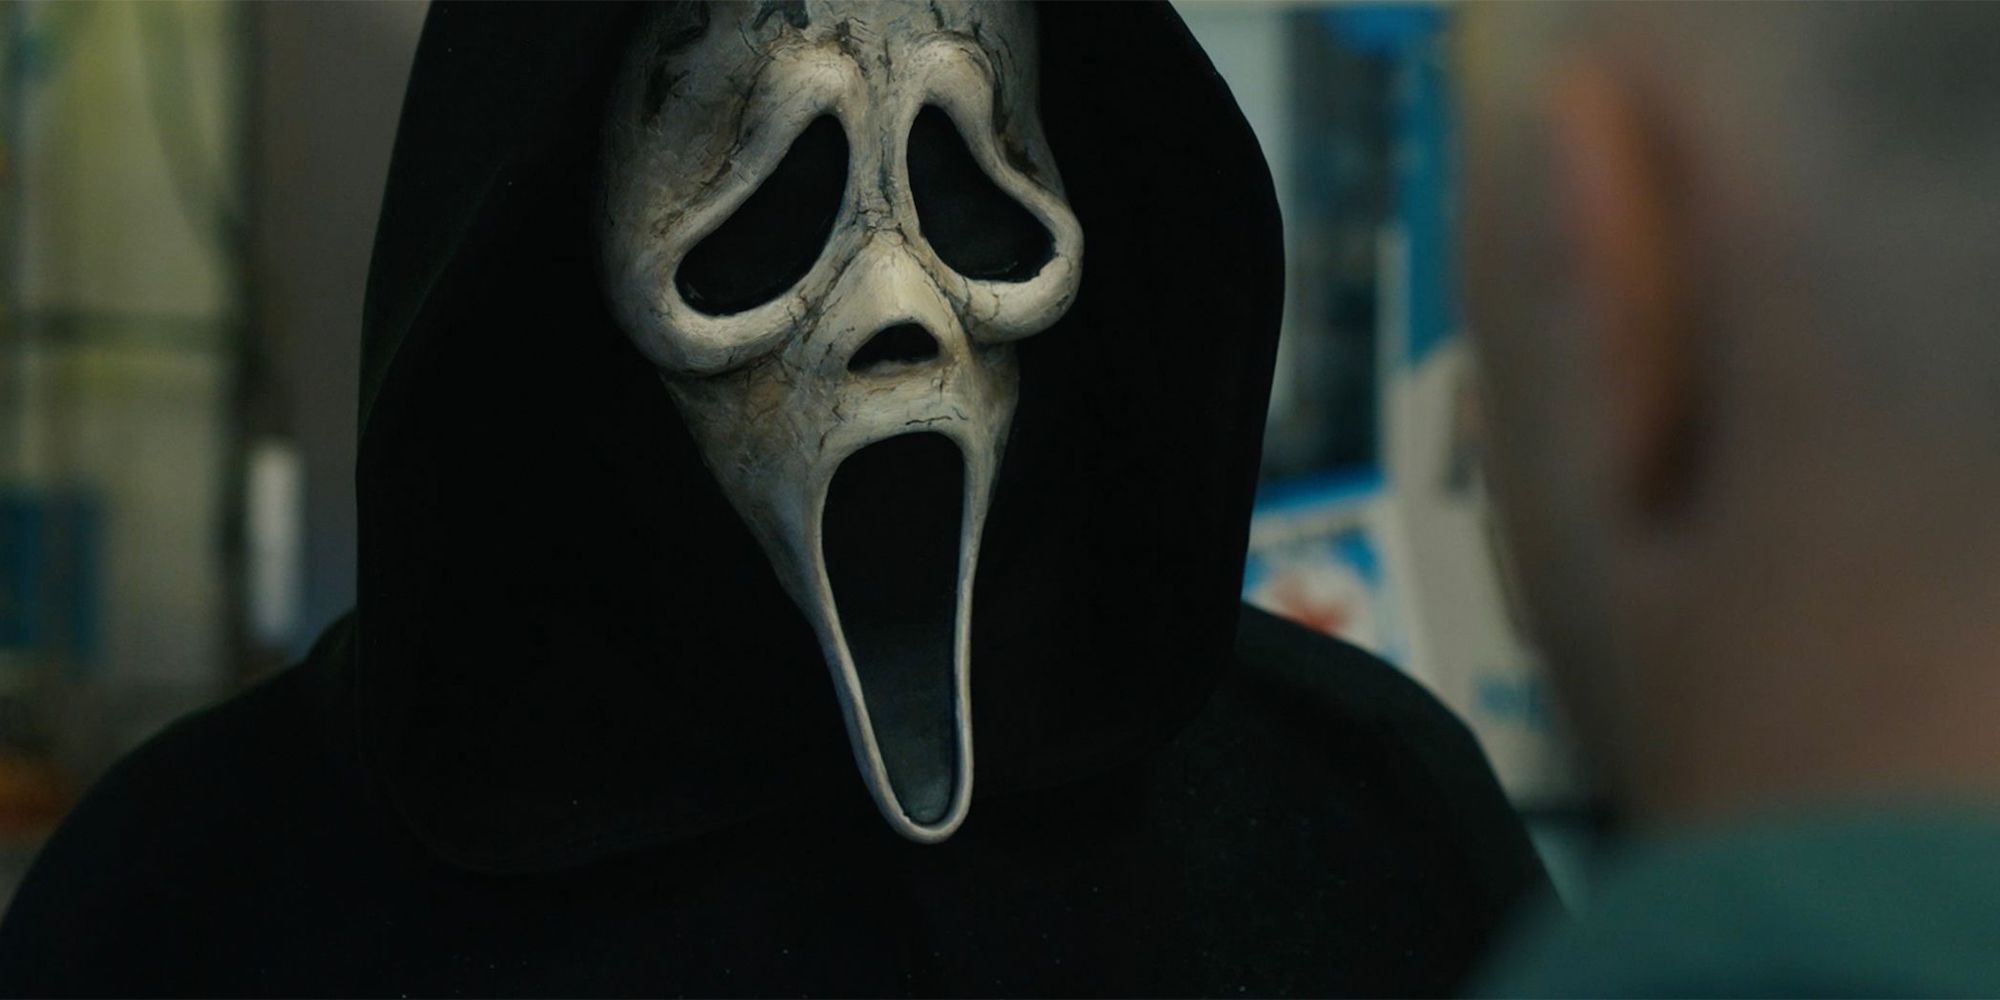 So you know how the Scream movies end with a jump scare image of Ghost Face?  Well the 6th one with him cocking the shot gun is the best one in my